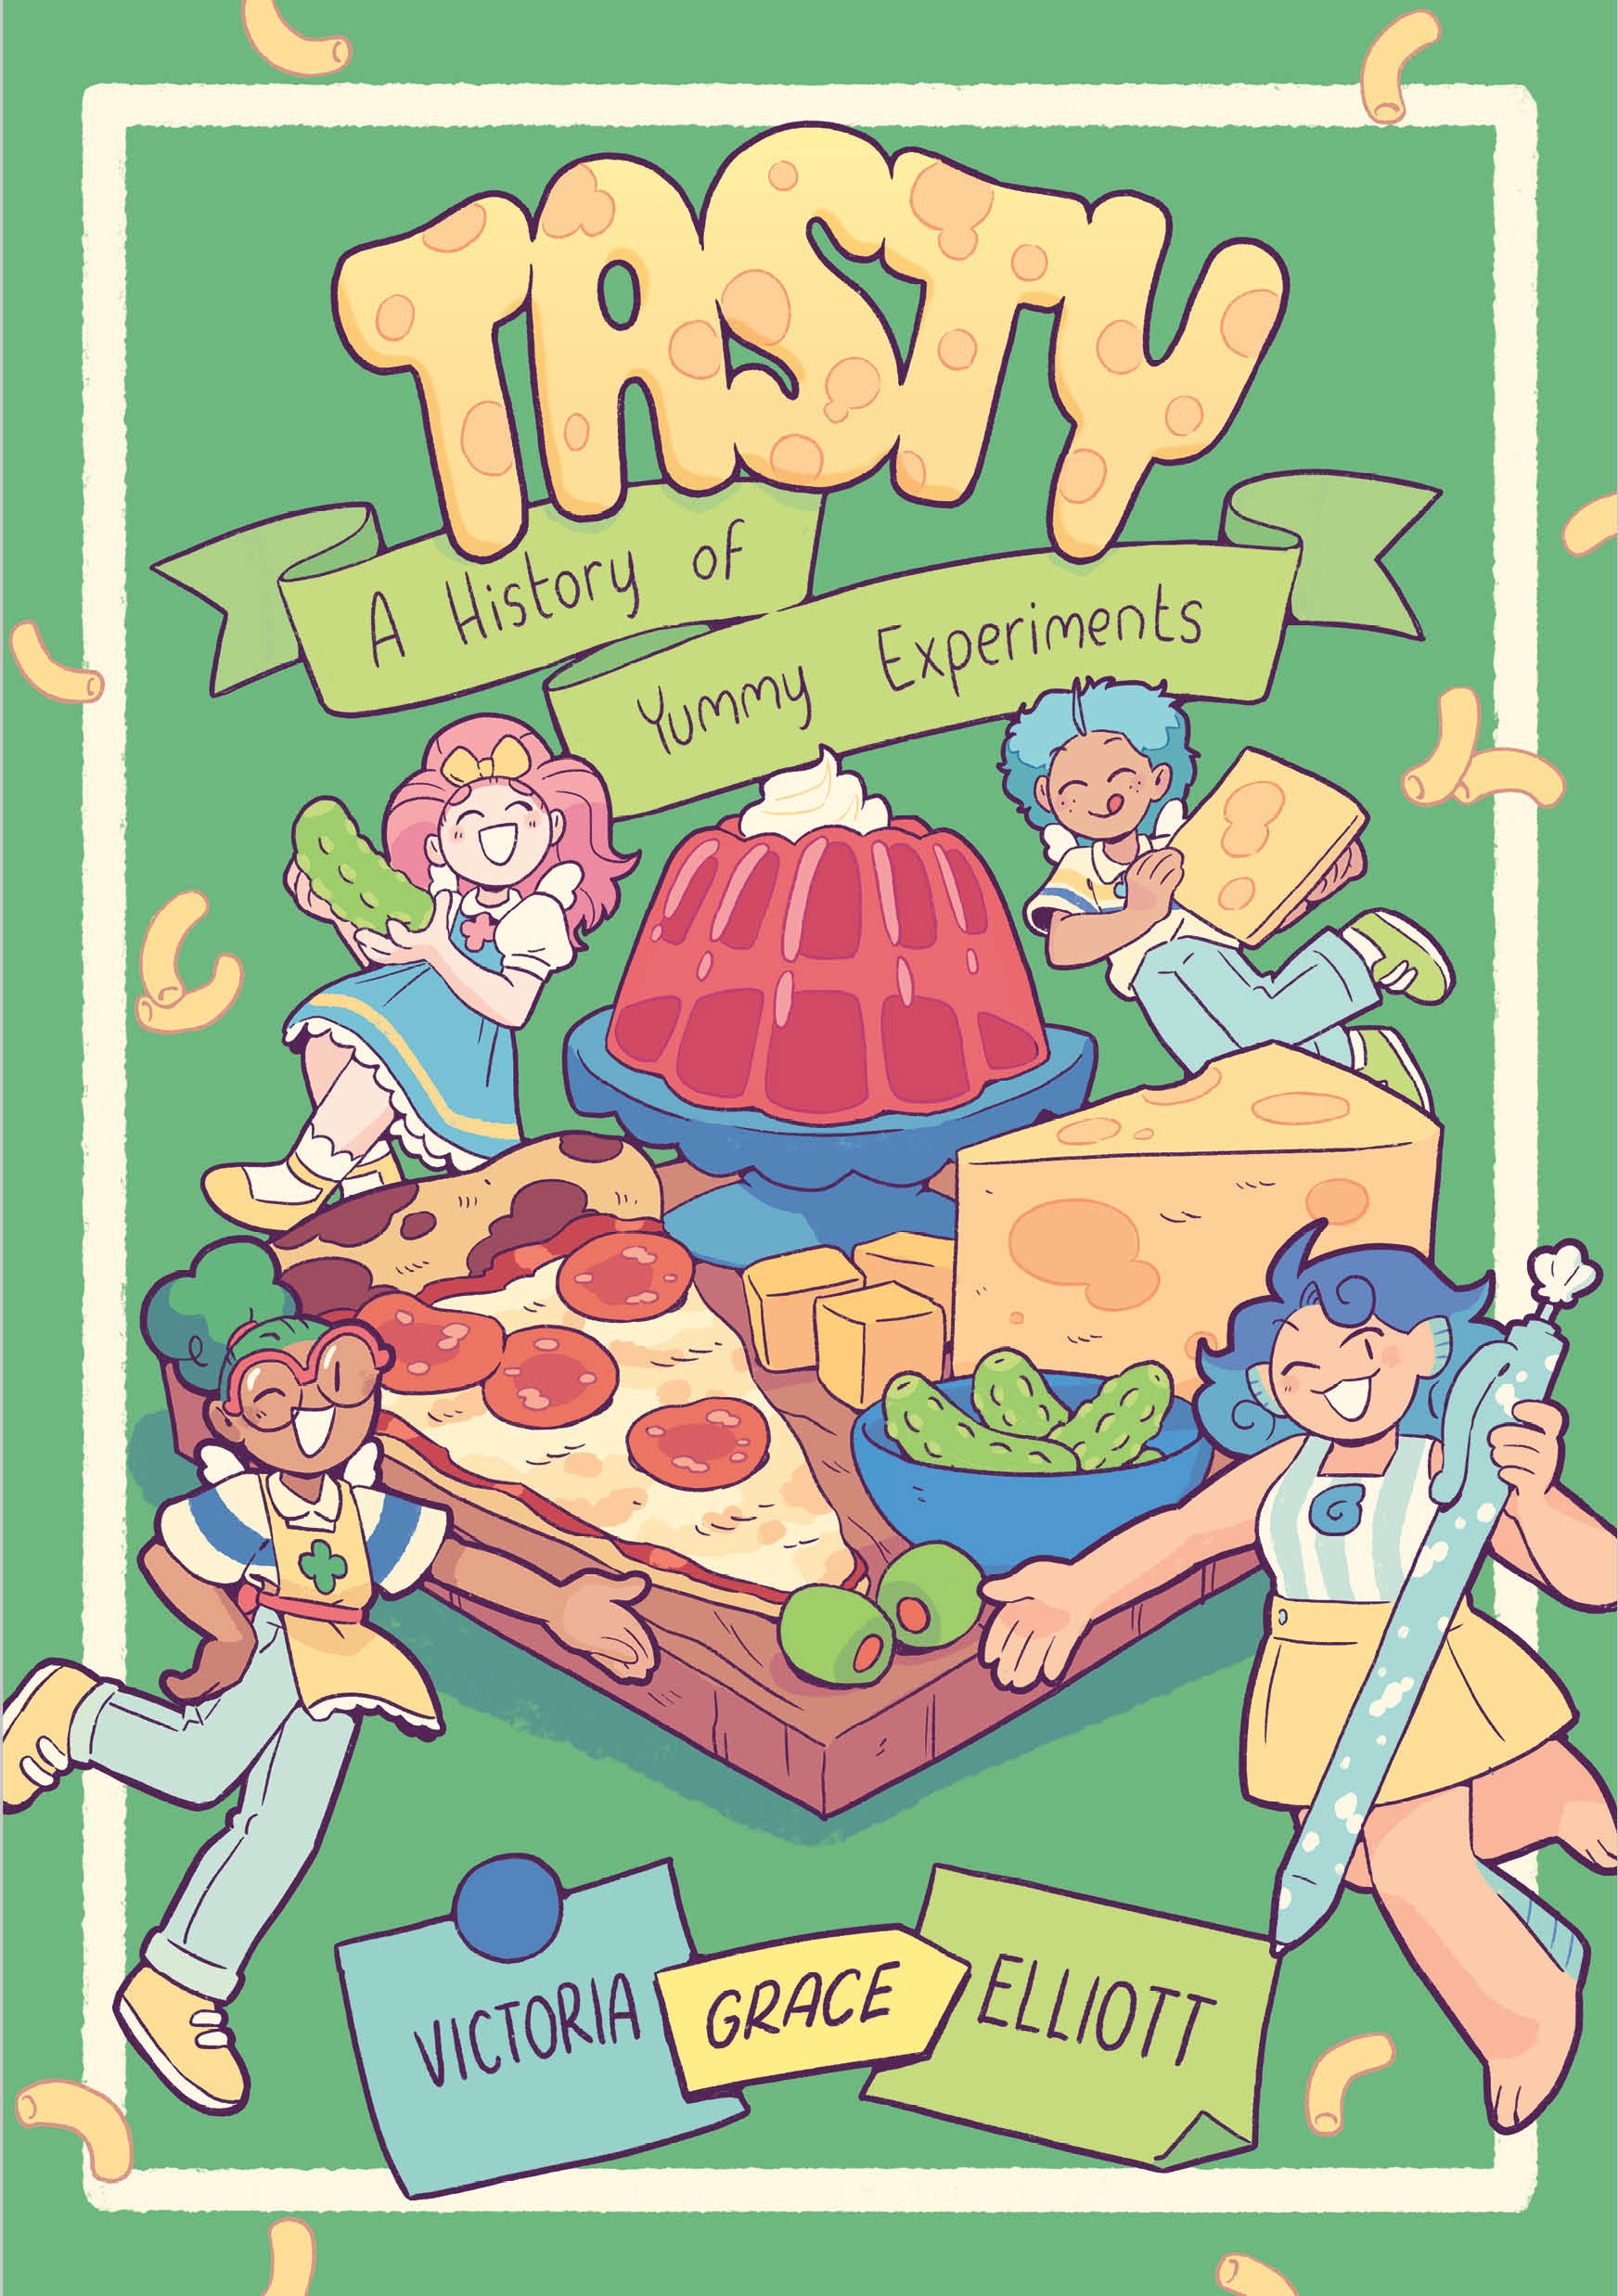 Tasty: A History of Yummy Experiments Graphic Novel